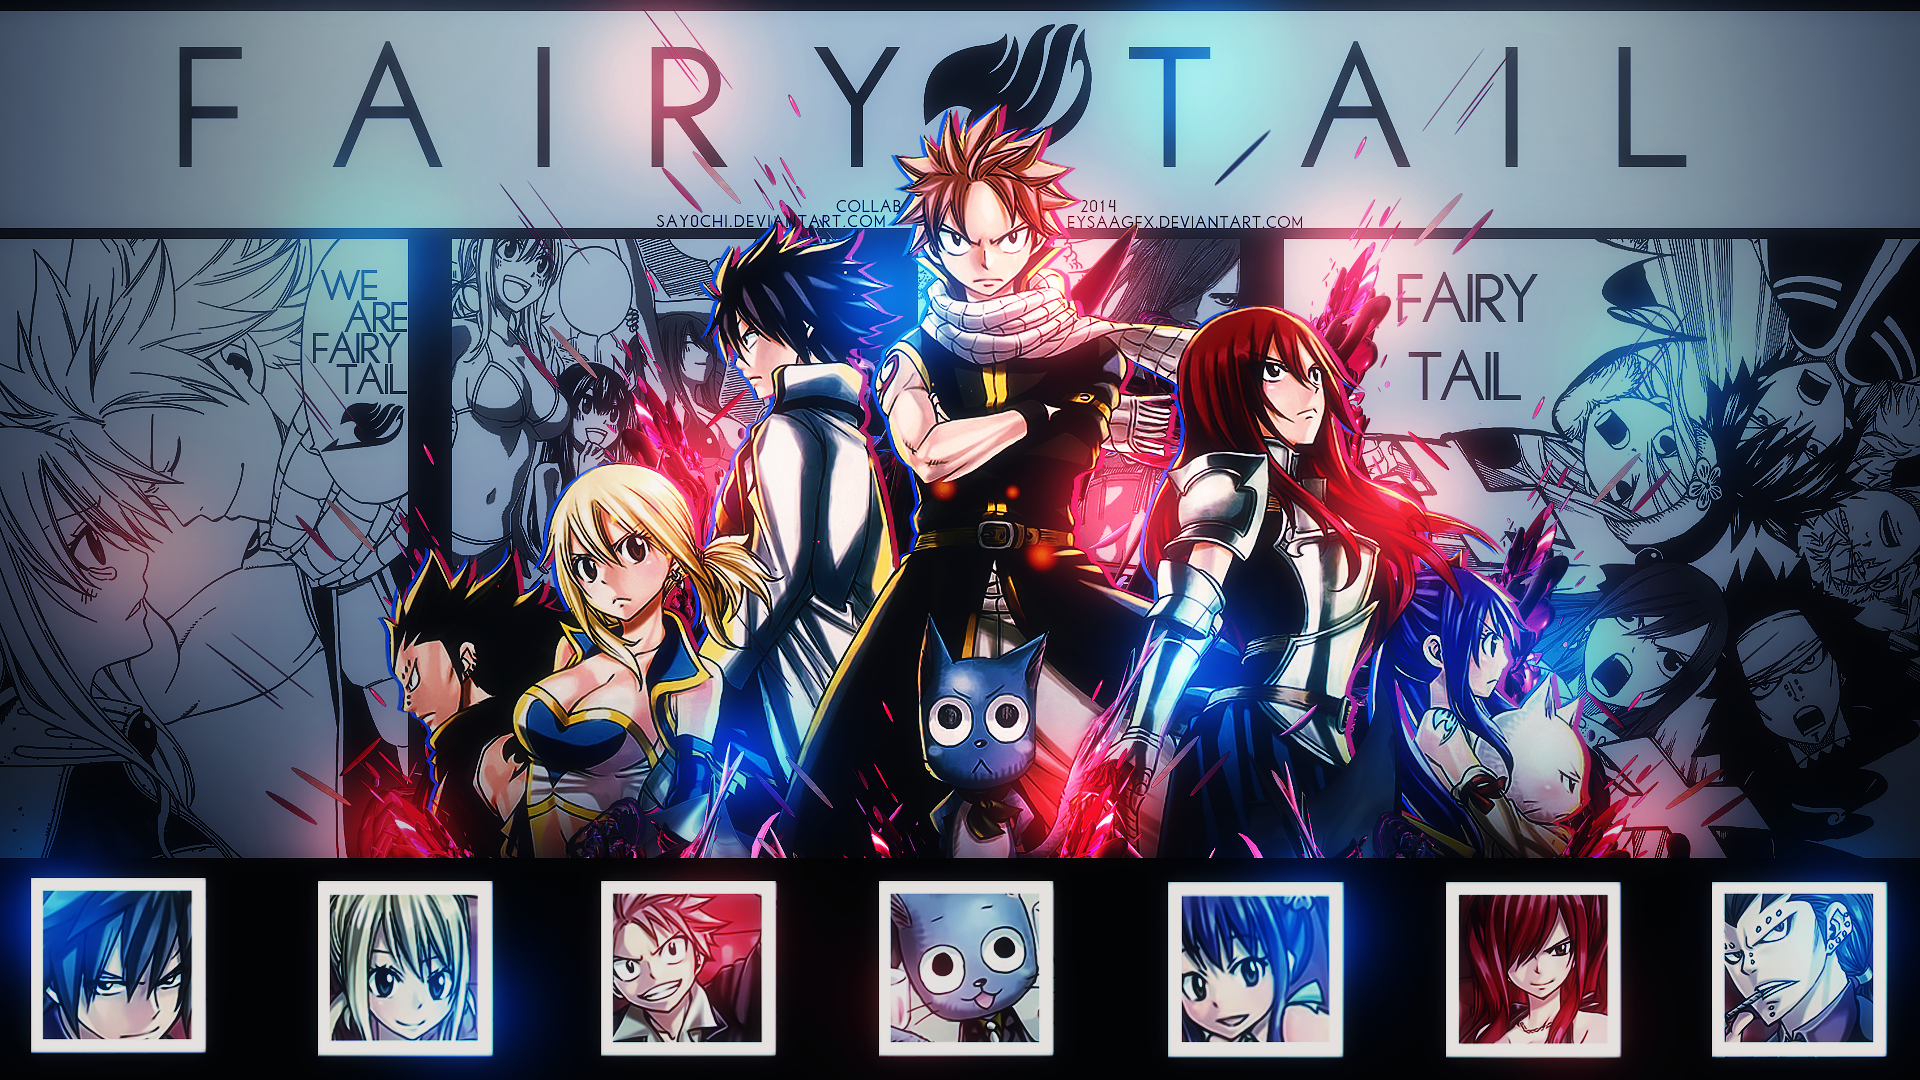 Pretty Cool Wallpaper Fairytail For Your